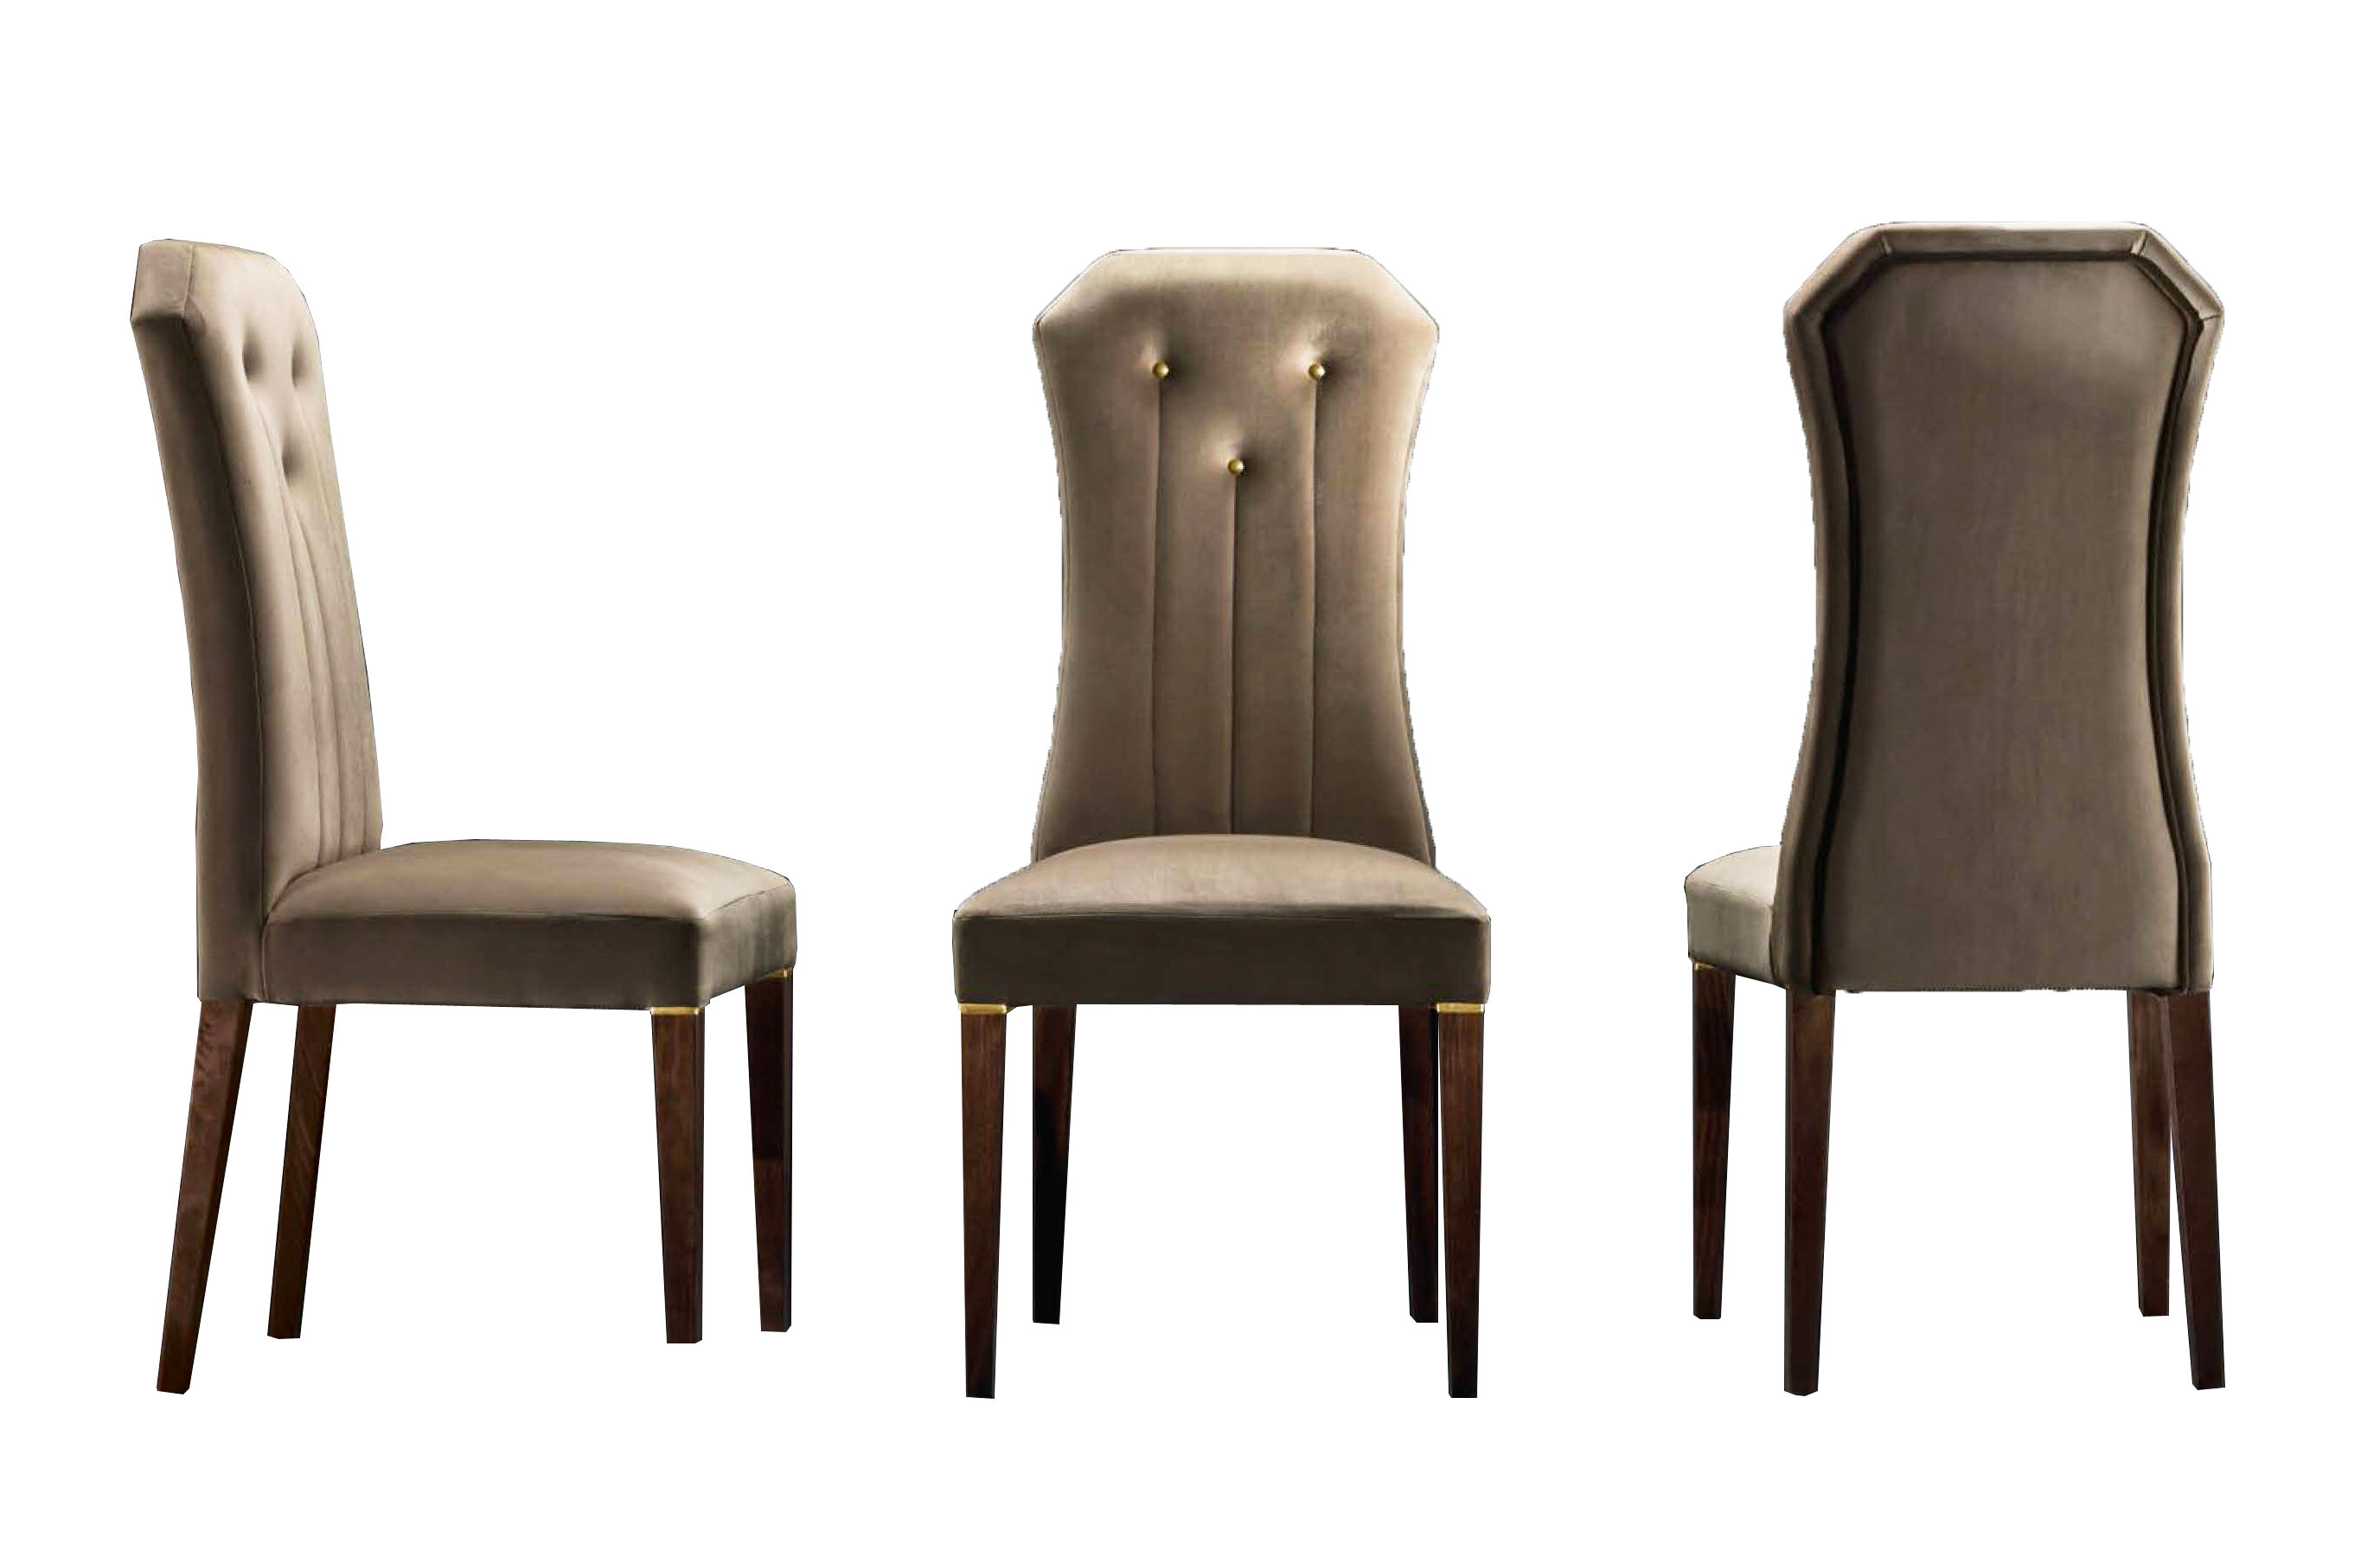 Brands Garcia Laurel & Hardy Tables Diamante Dining Chair by Arredoclassic